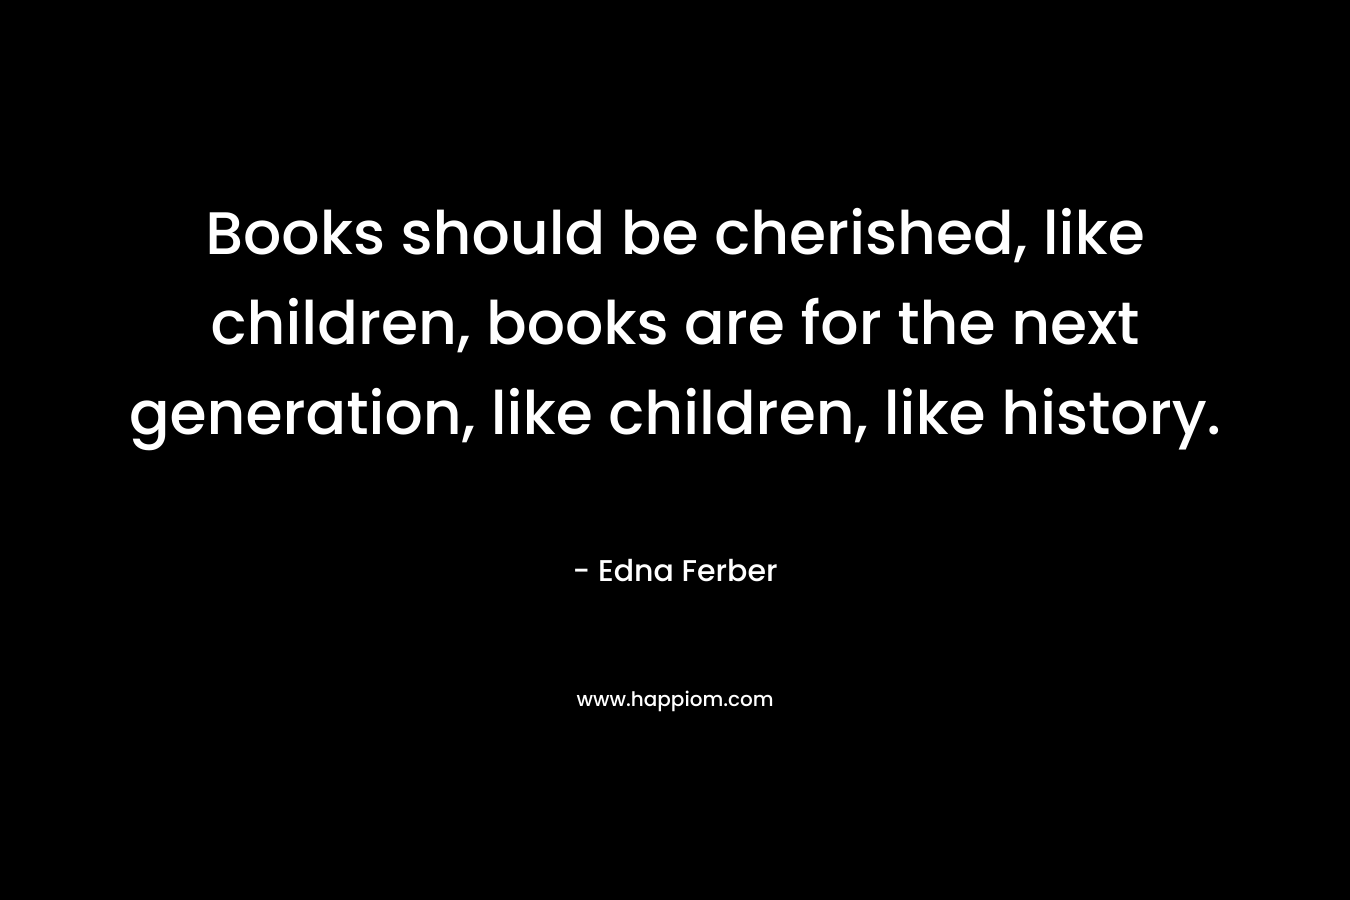 Books should be cherished, like children, books are for the next generation, like children, like history.